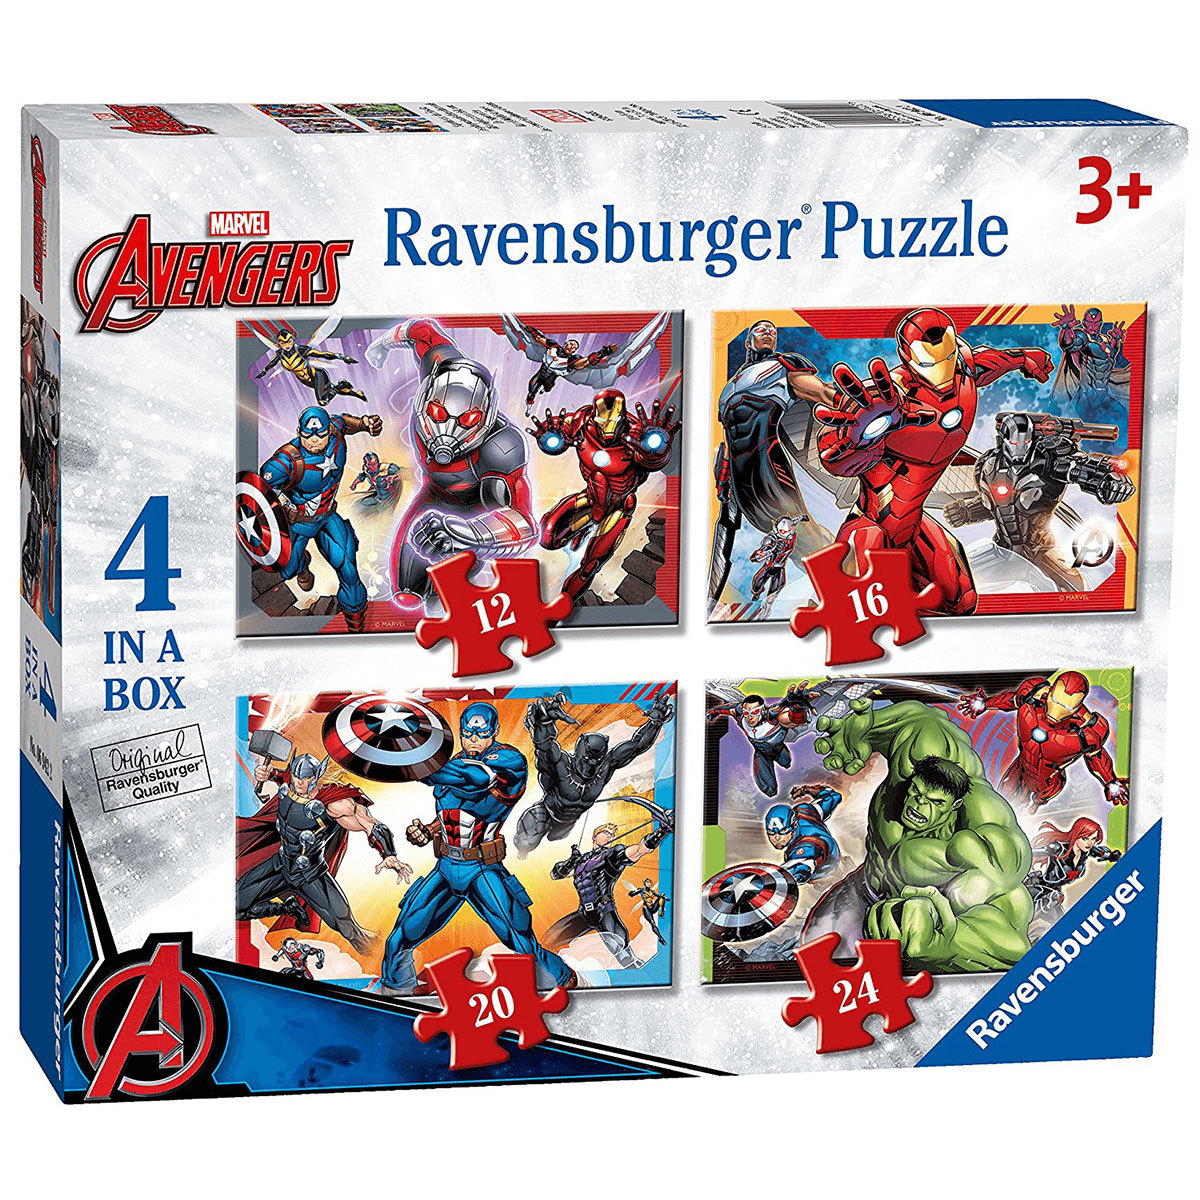 Ravensburger 4 in a Box Puzzles - Marvel Avengers